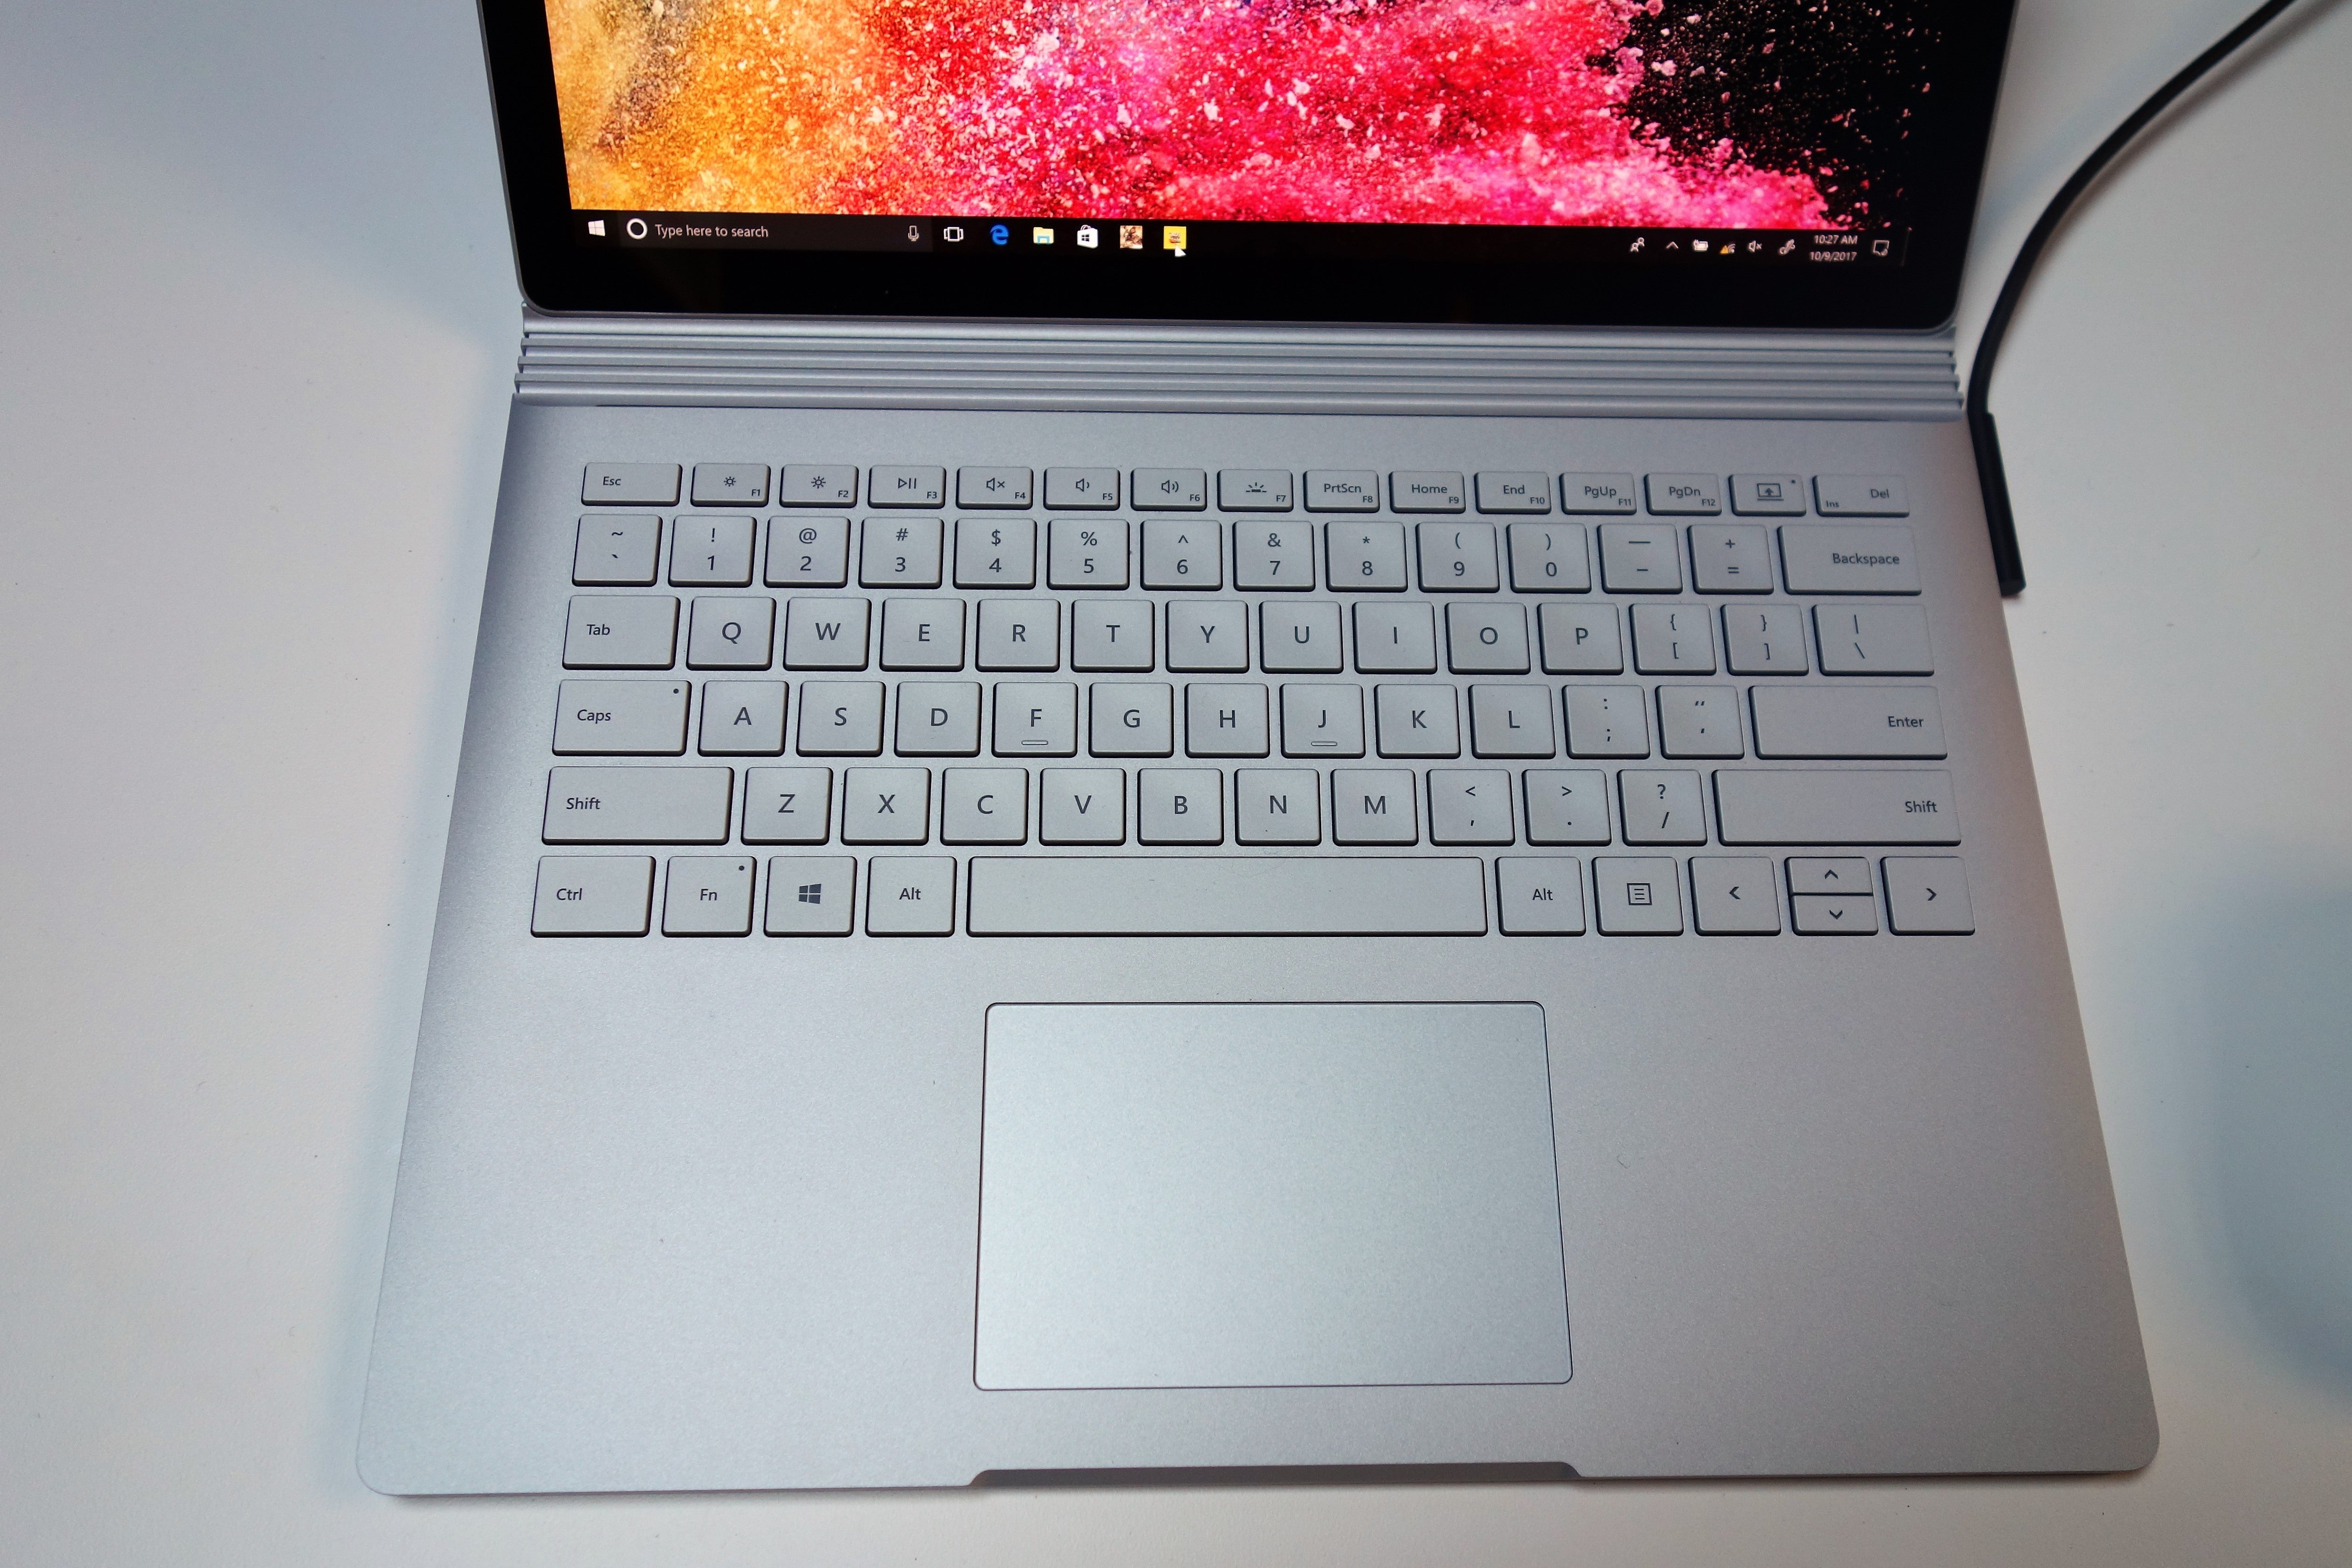 check surface book 2 windows 10 pro download